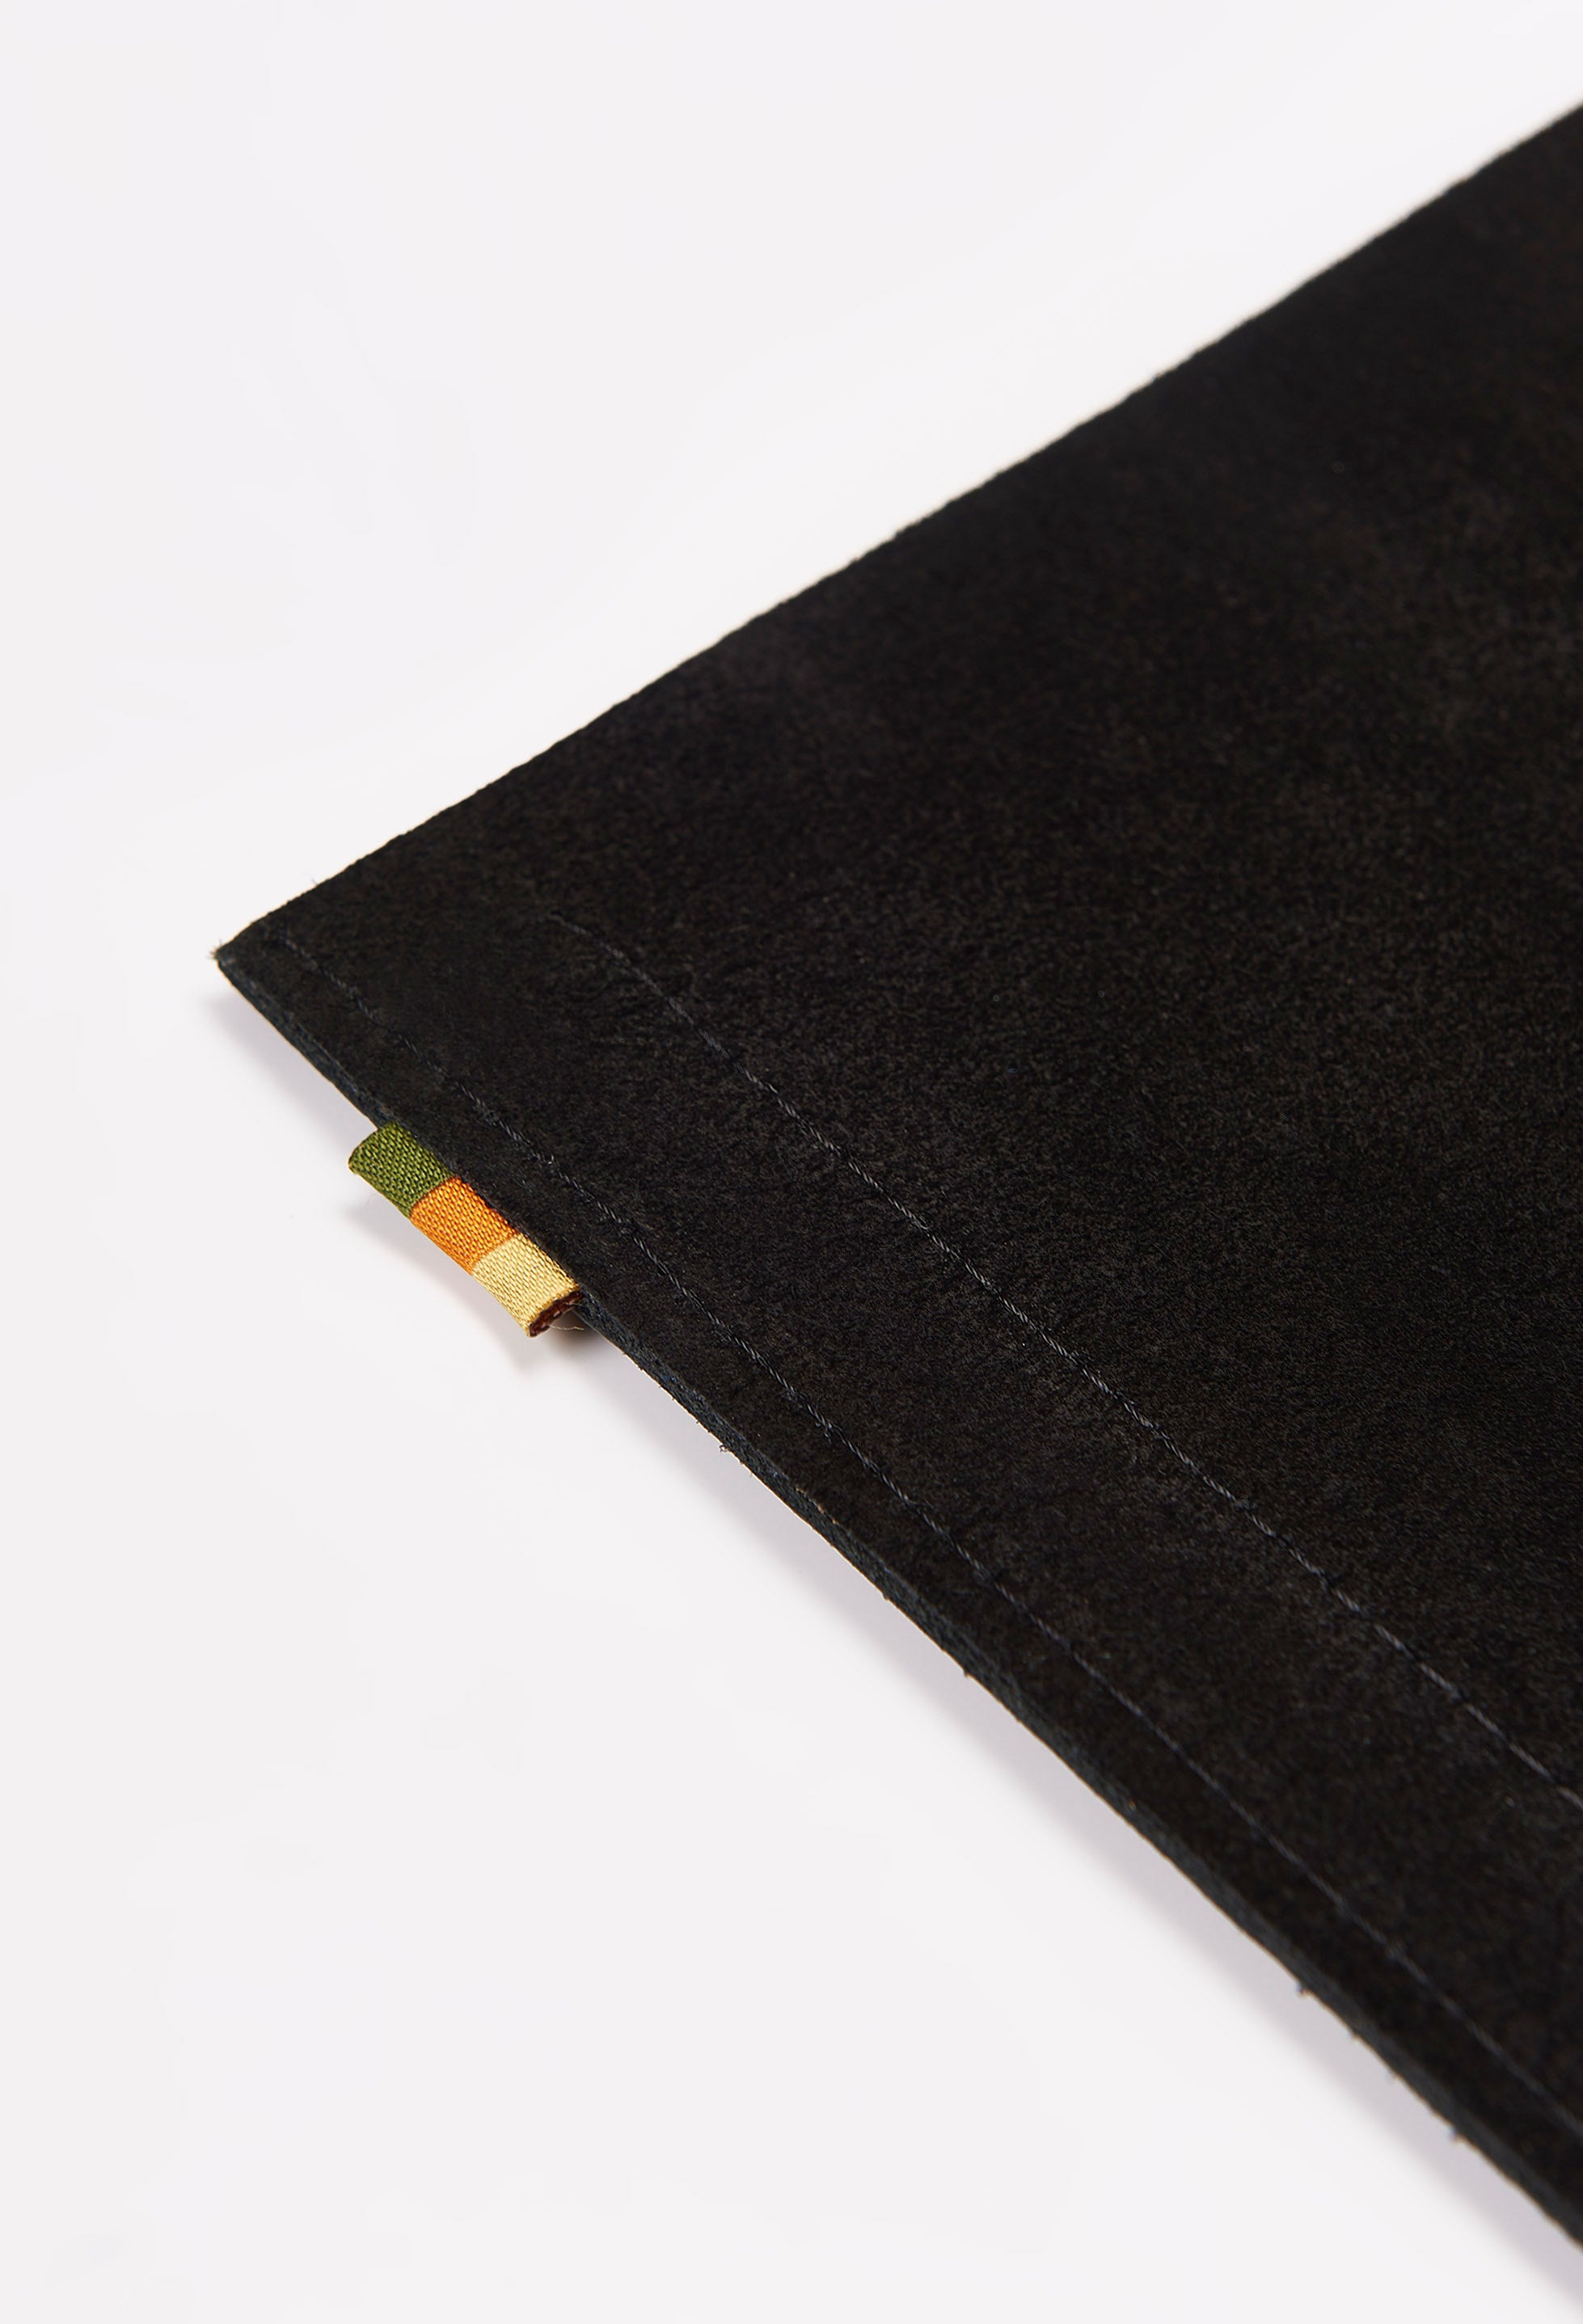 Partial photo of the rear of a black leather minimalist desk mat made of black suede leather with our Signature Grosgrain Loop Tab.